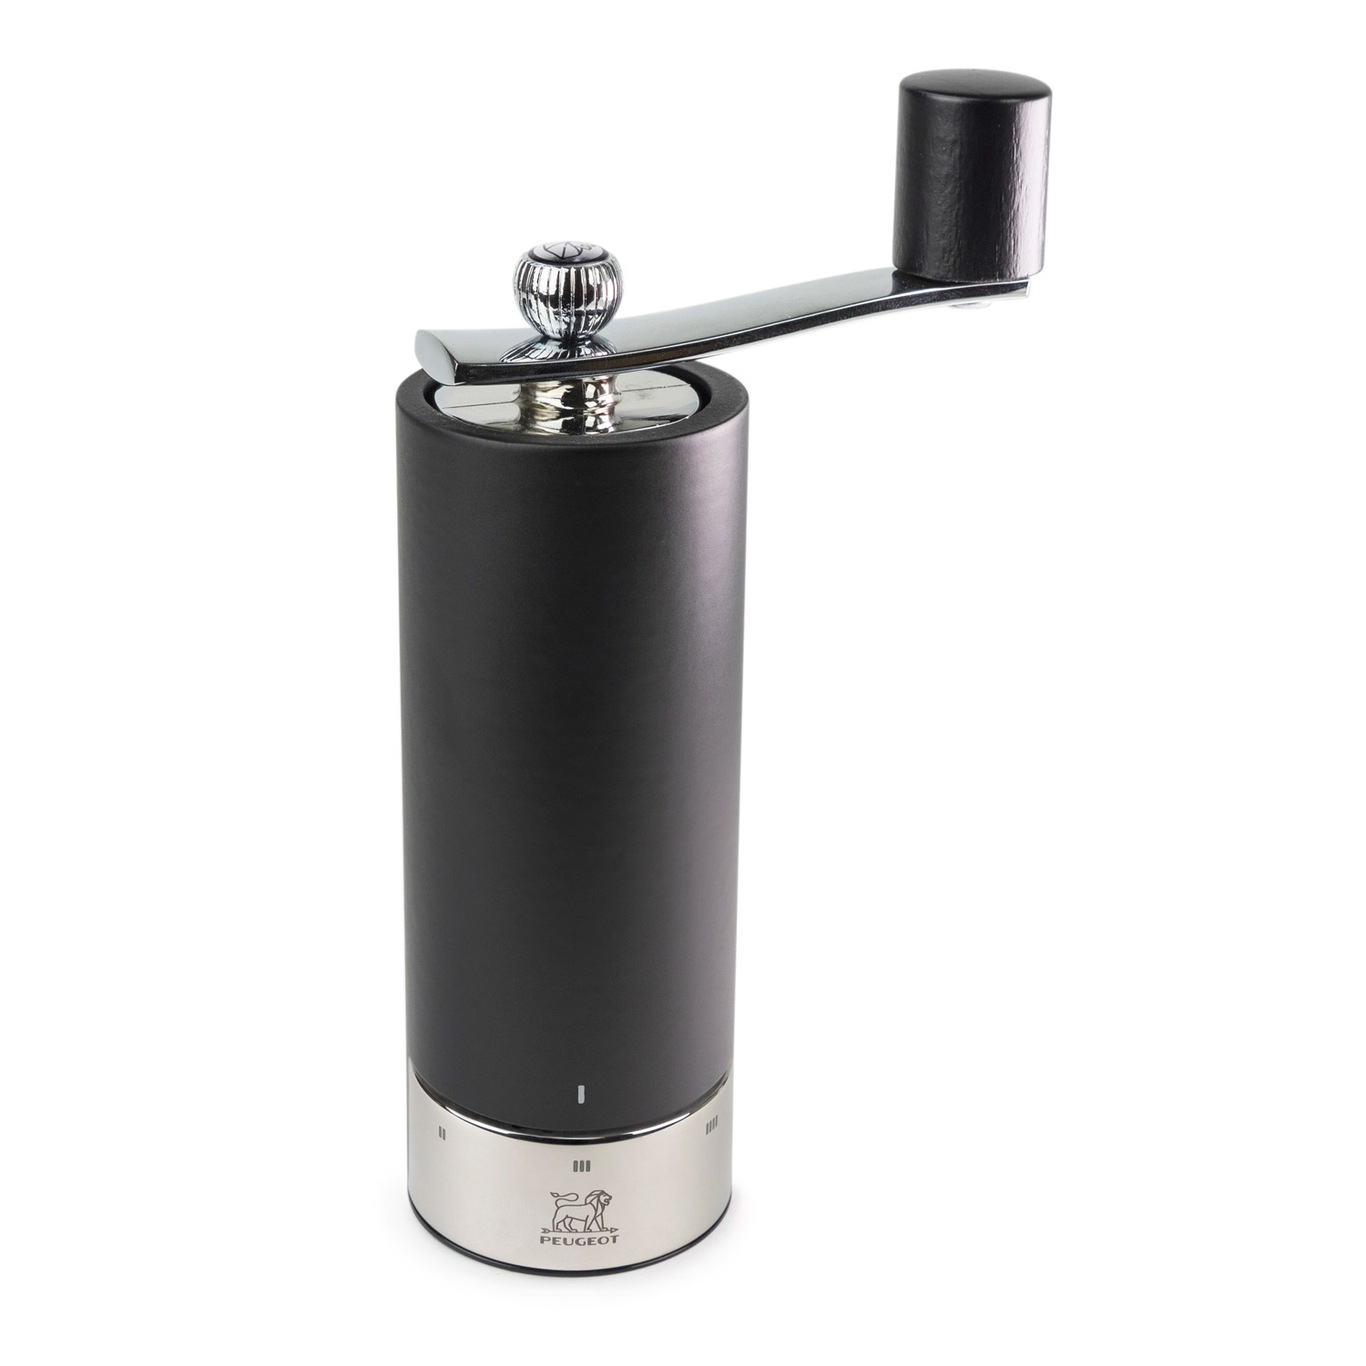 https://royaldesign.com/image/2/peugeot-isen-pepper-mill-with-crank-handle-uselect-18-cm-1?w=800&quality=80